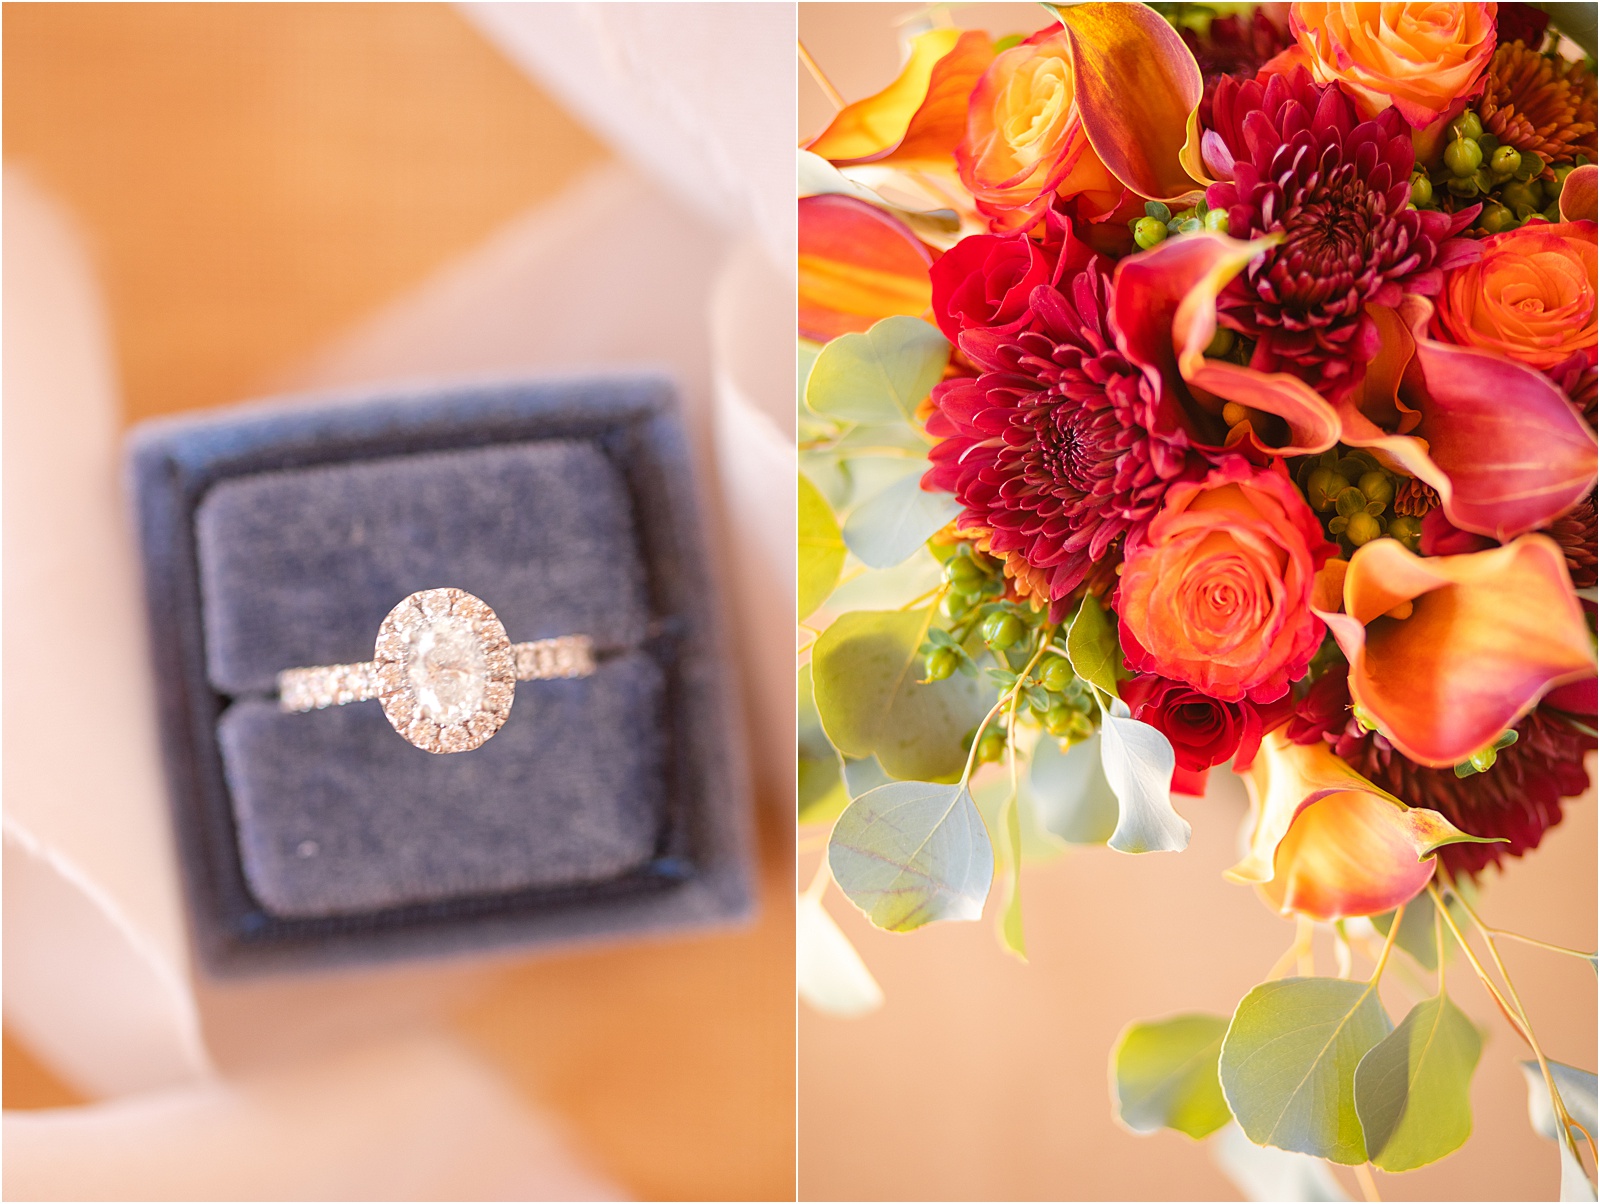 Diamond engagement ring with bridal flowers